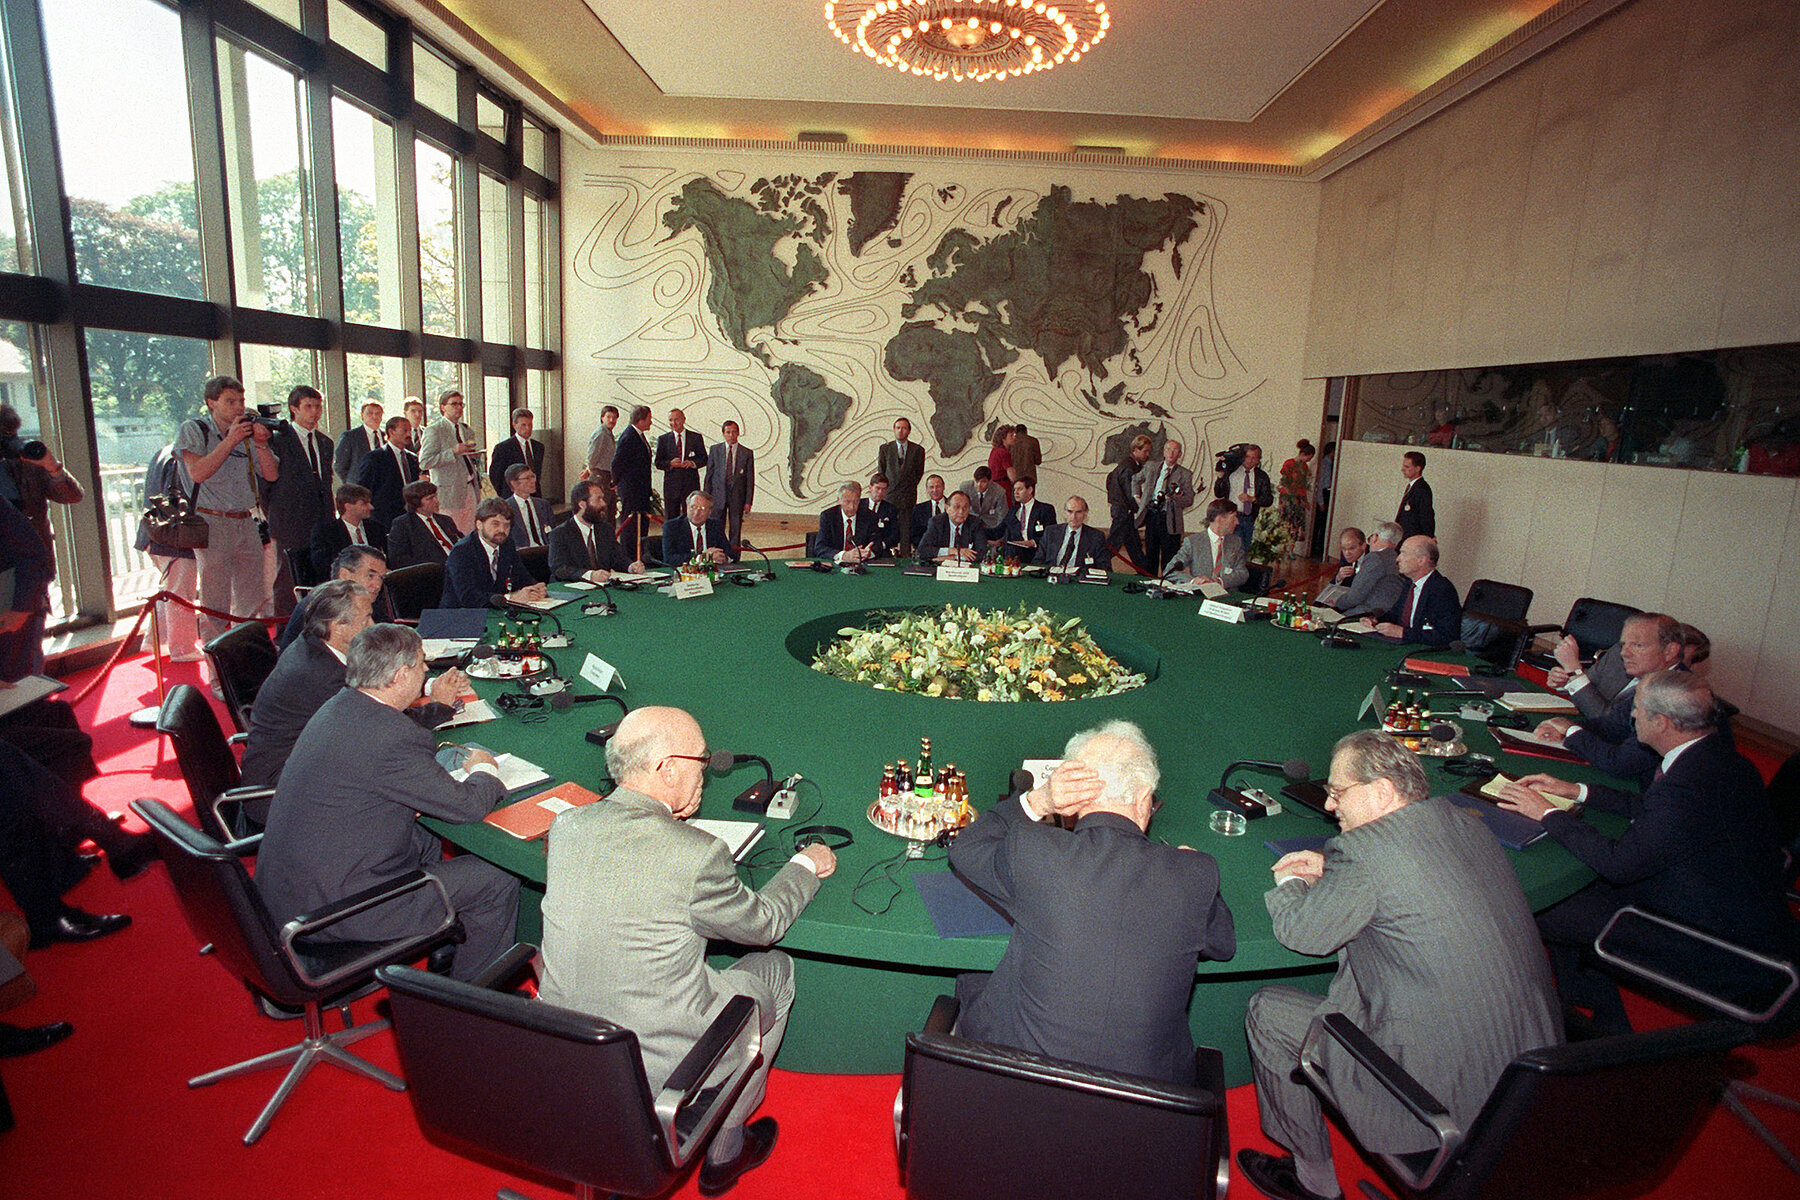 Several men in suits sit around a large green round table. On the left side are journalists taking photographs. 